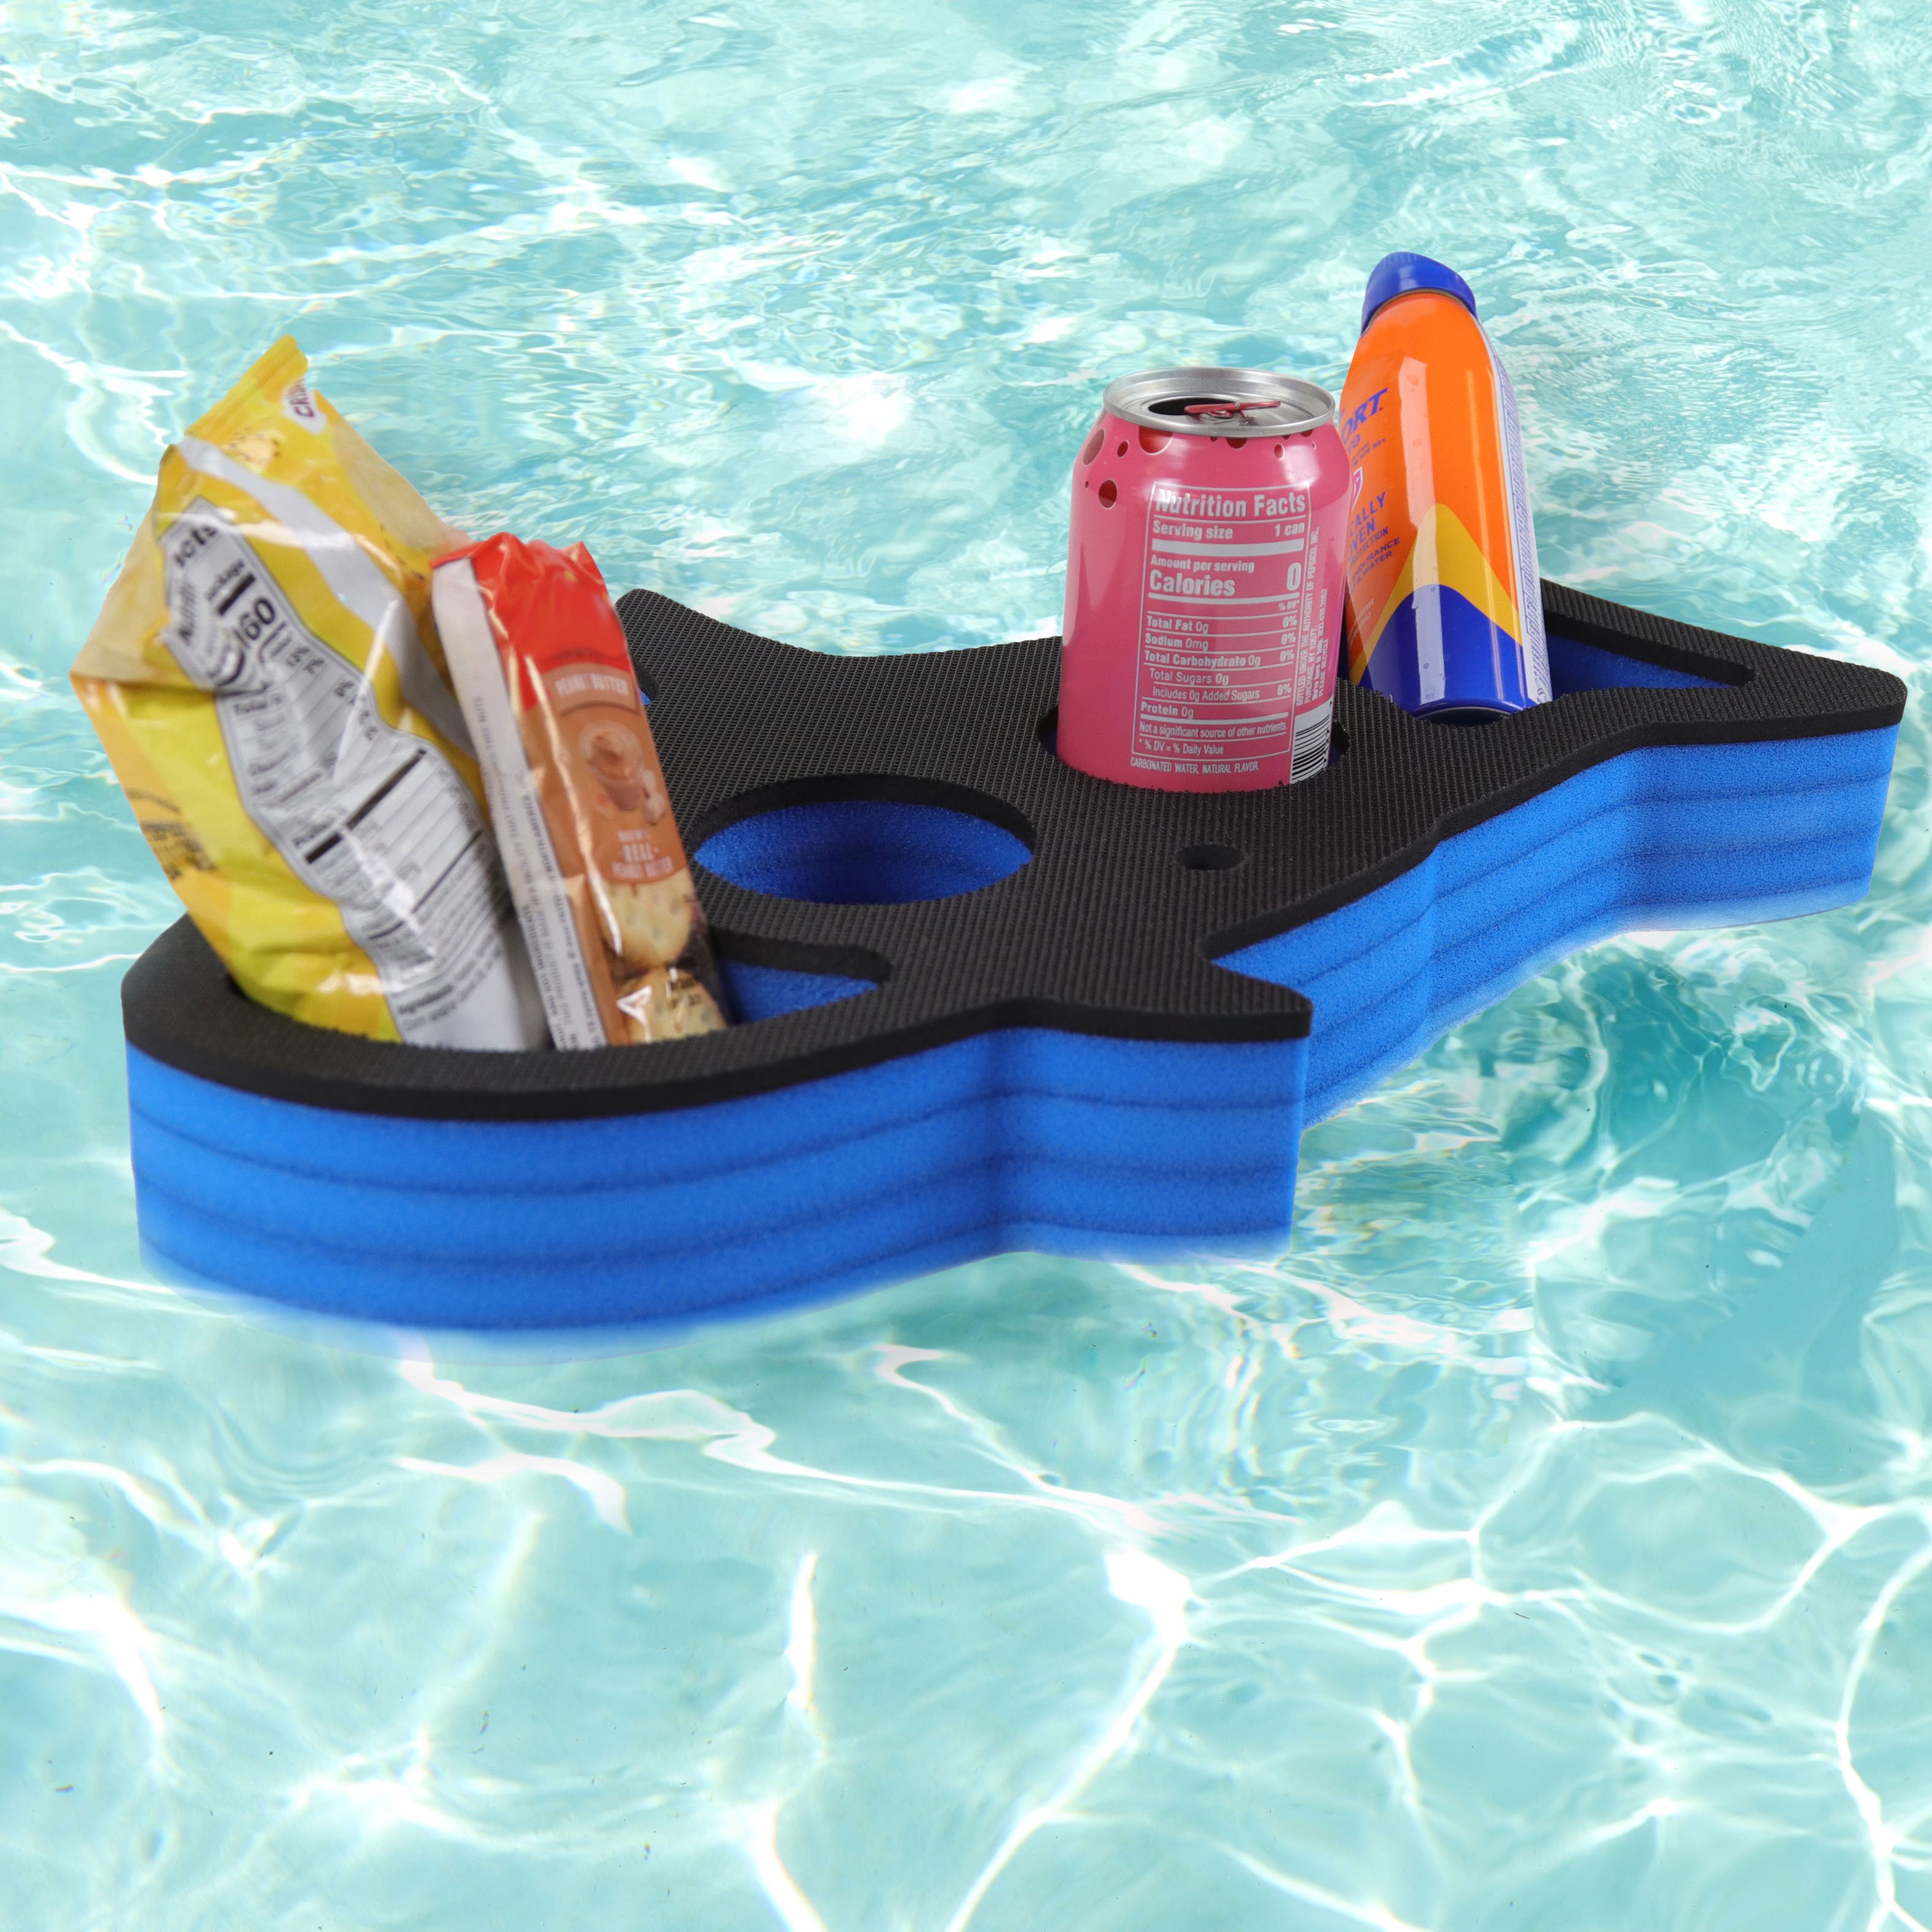 Shark Shape Floating Drink Holder Refreshment Table Tray for Pool Beach Party Hot Tub Float Lounge Durable Blue and Black Foam 4 Compartment Fade Resistant 17.5 Inches